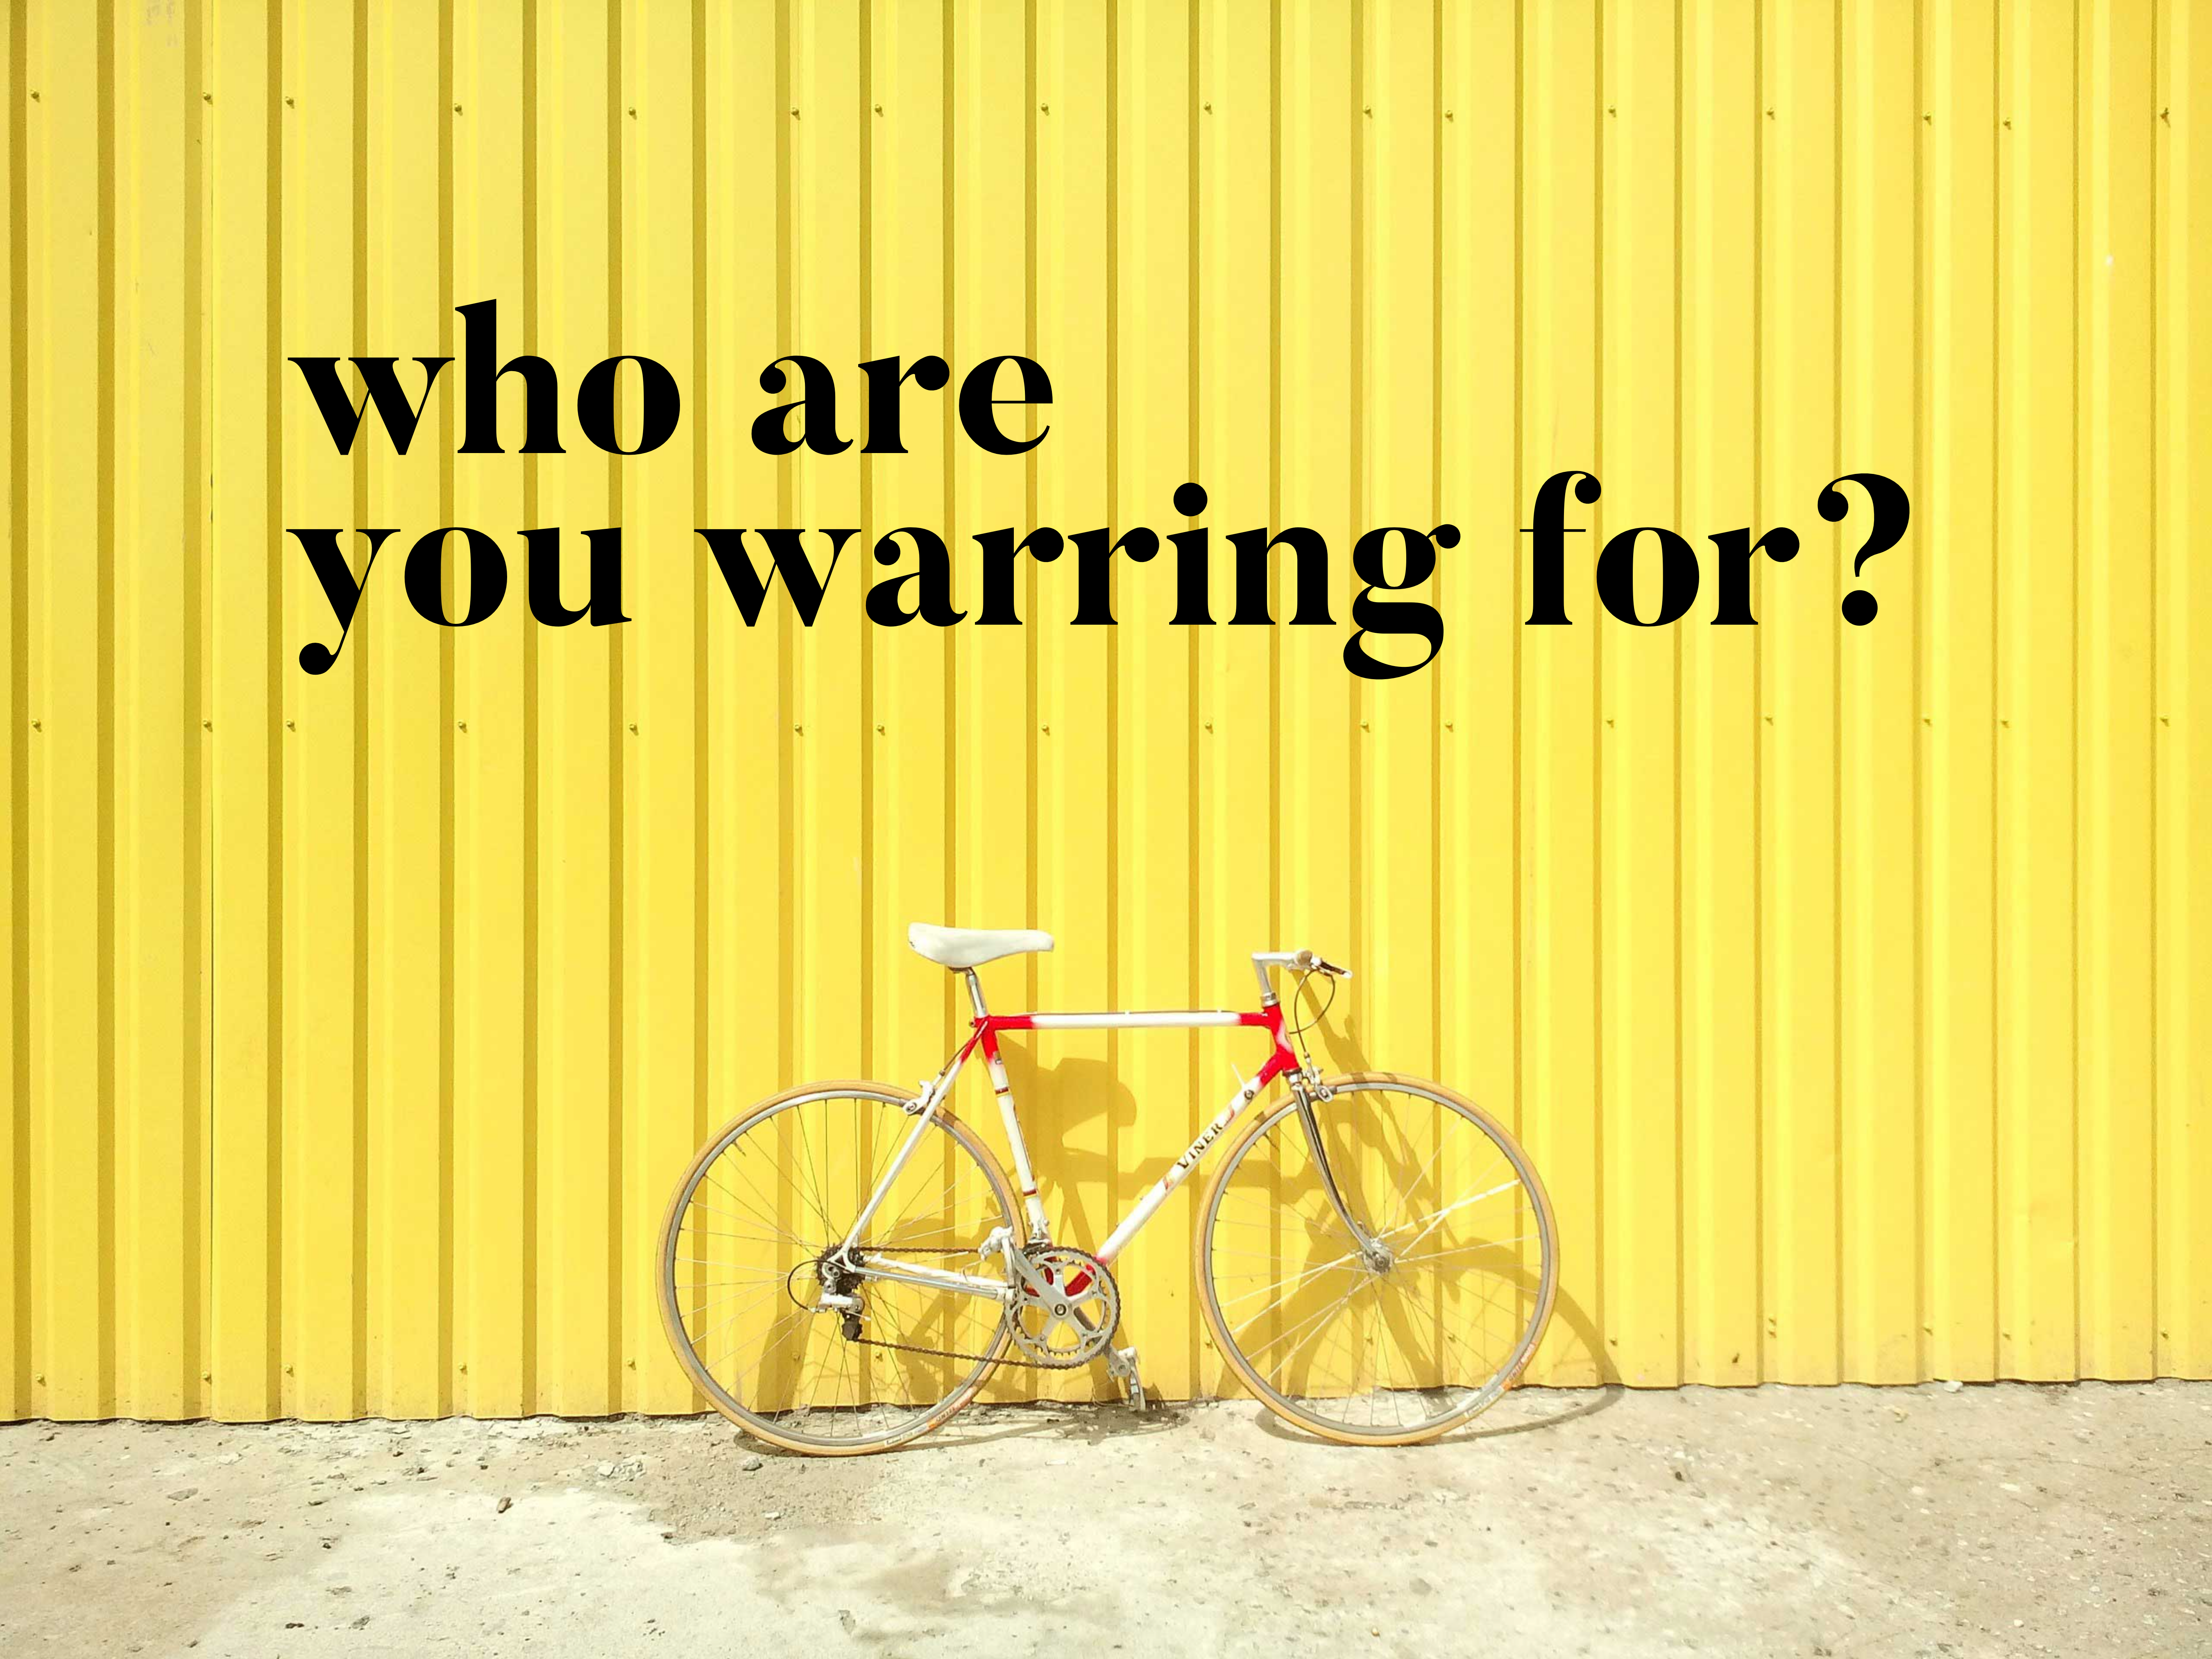 Who are you warring for?